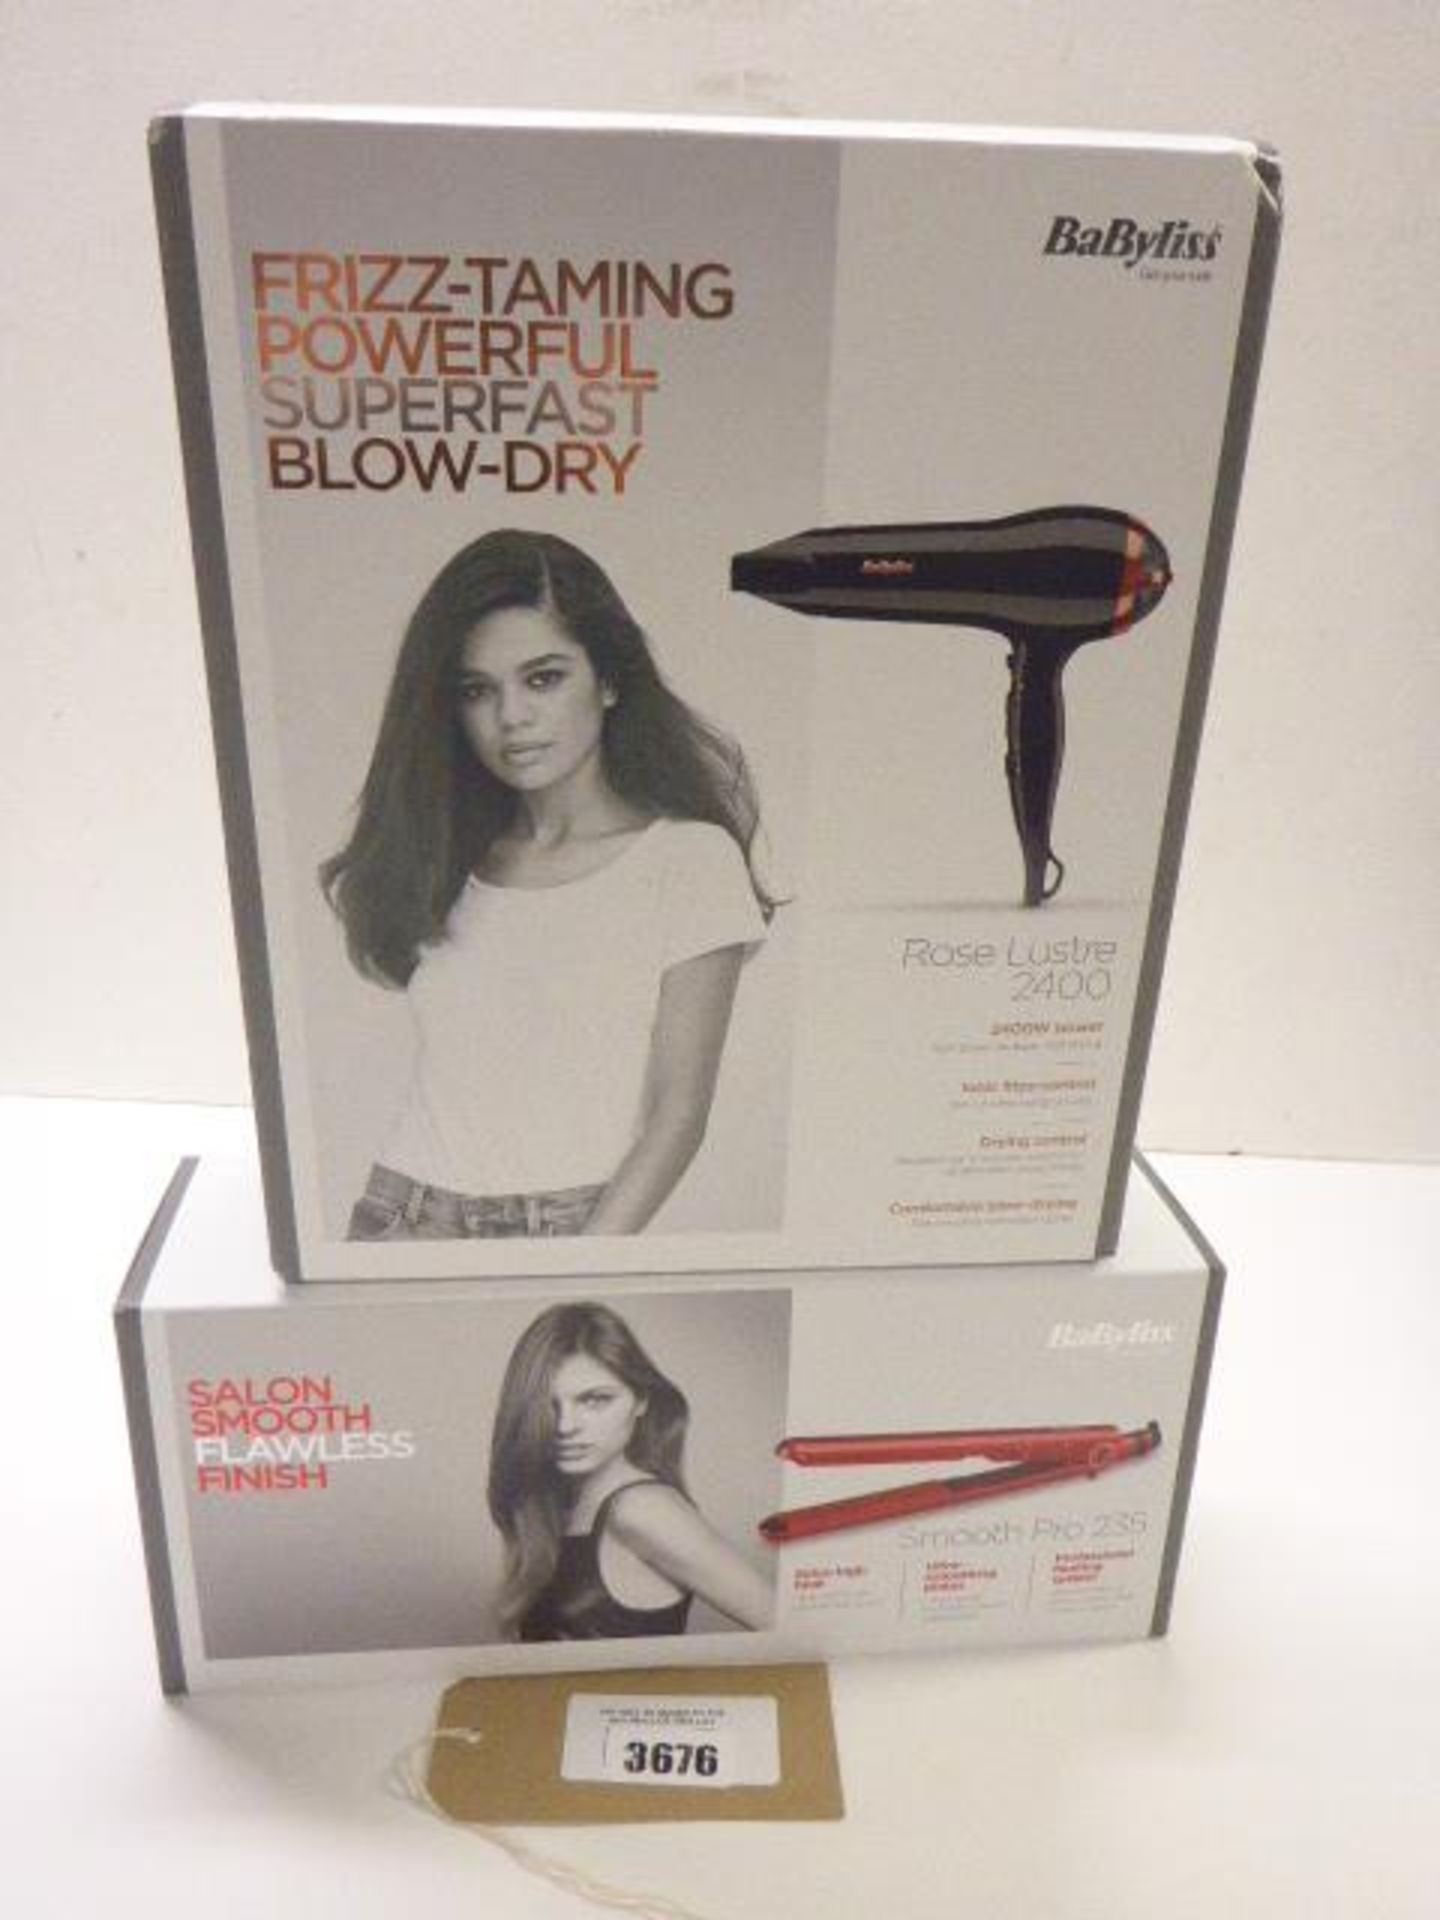 BaByliss Salon smooth flawless finish Pro 235 hair straighteners and BaByliss Rose Lustre 2400